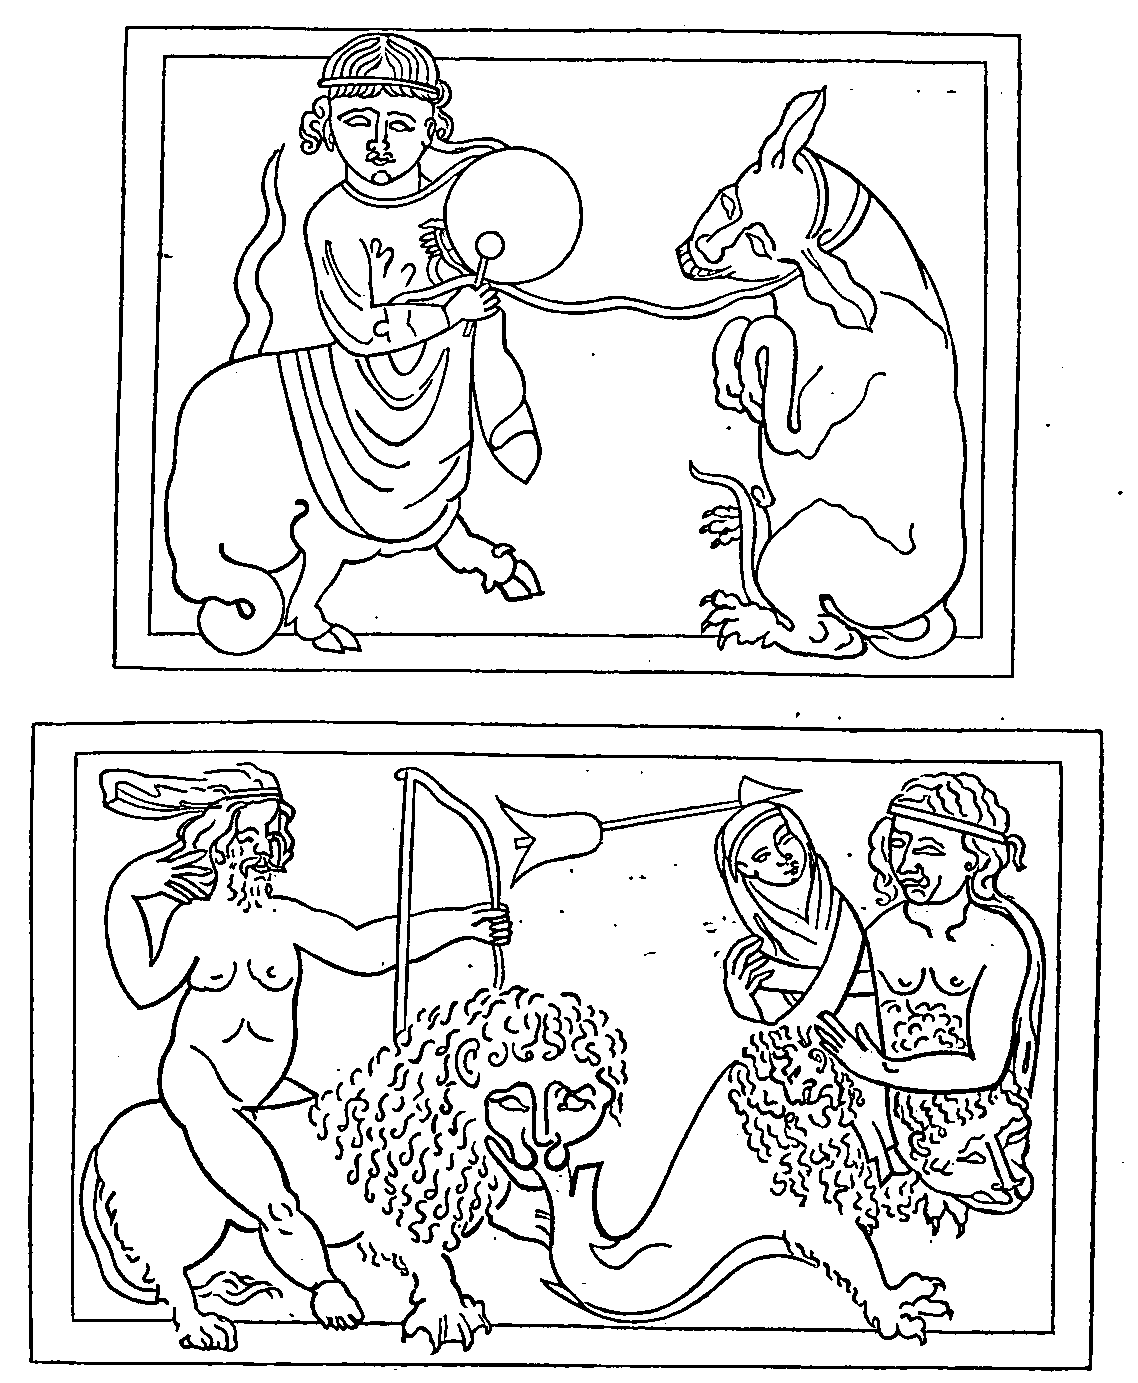 naaman and the servant girl coloring pages - photo #29